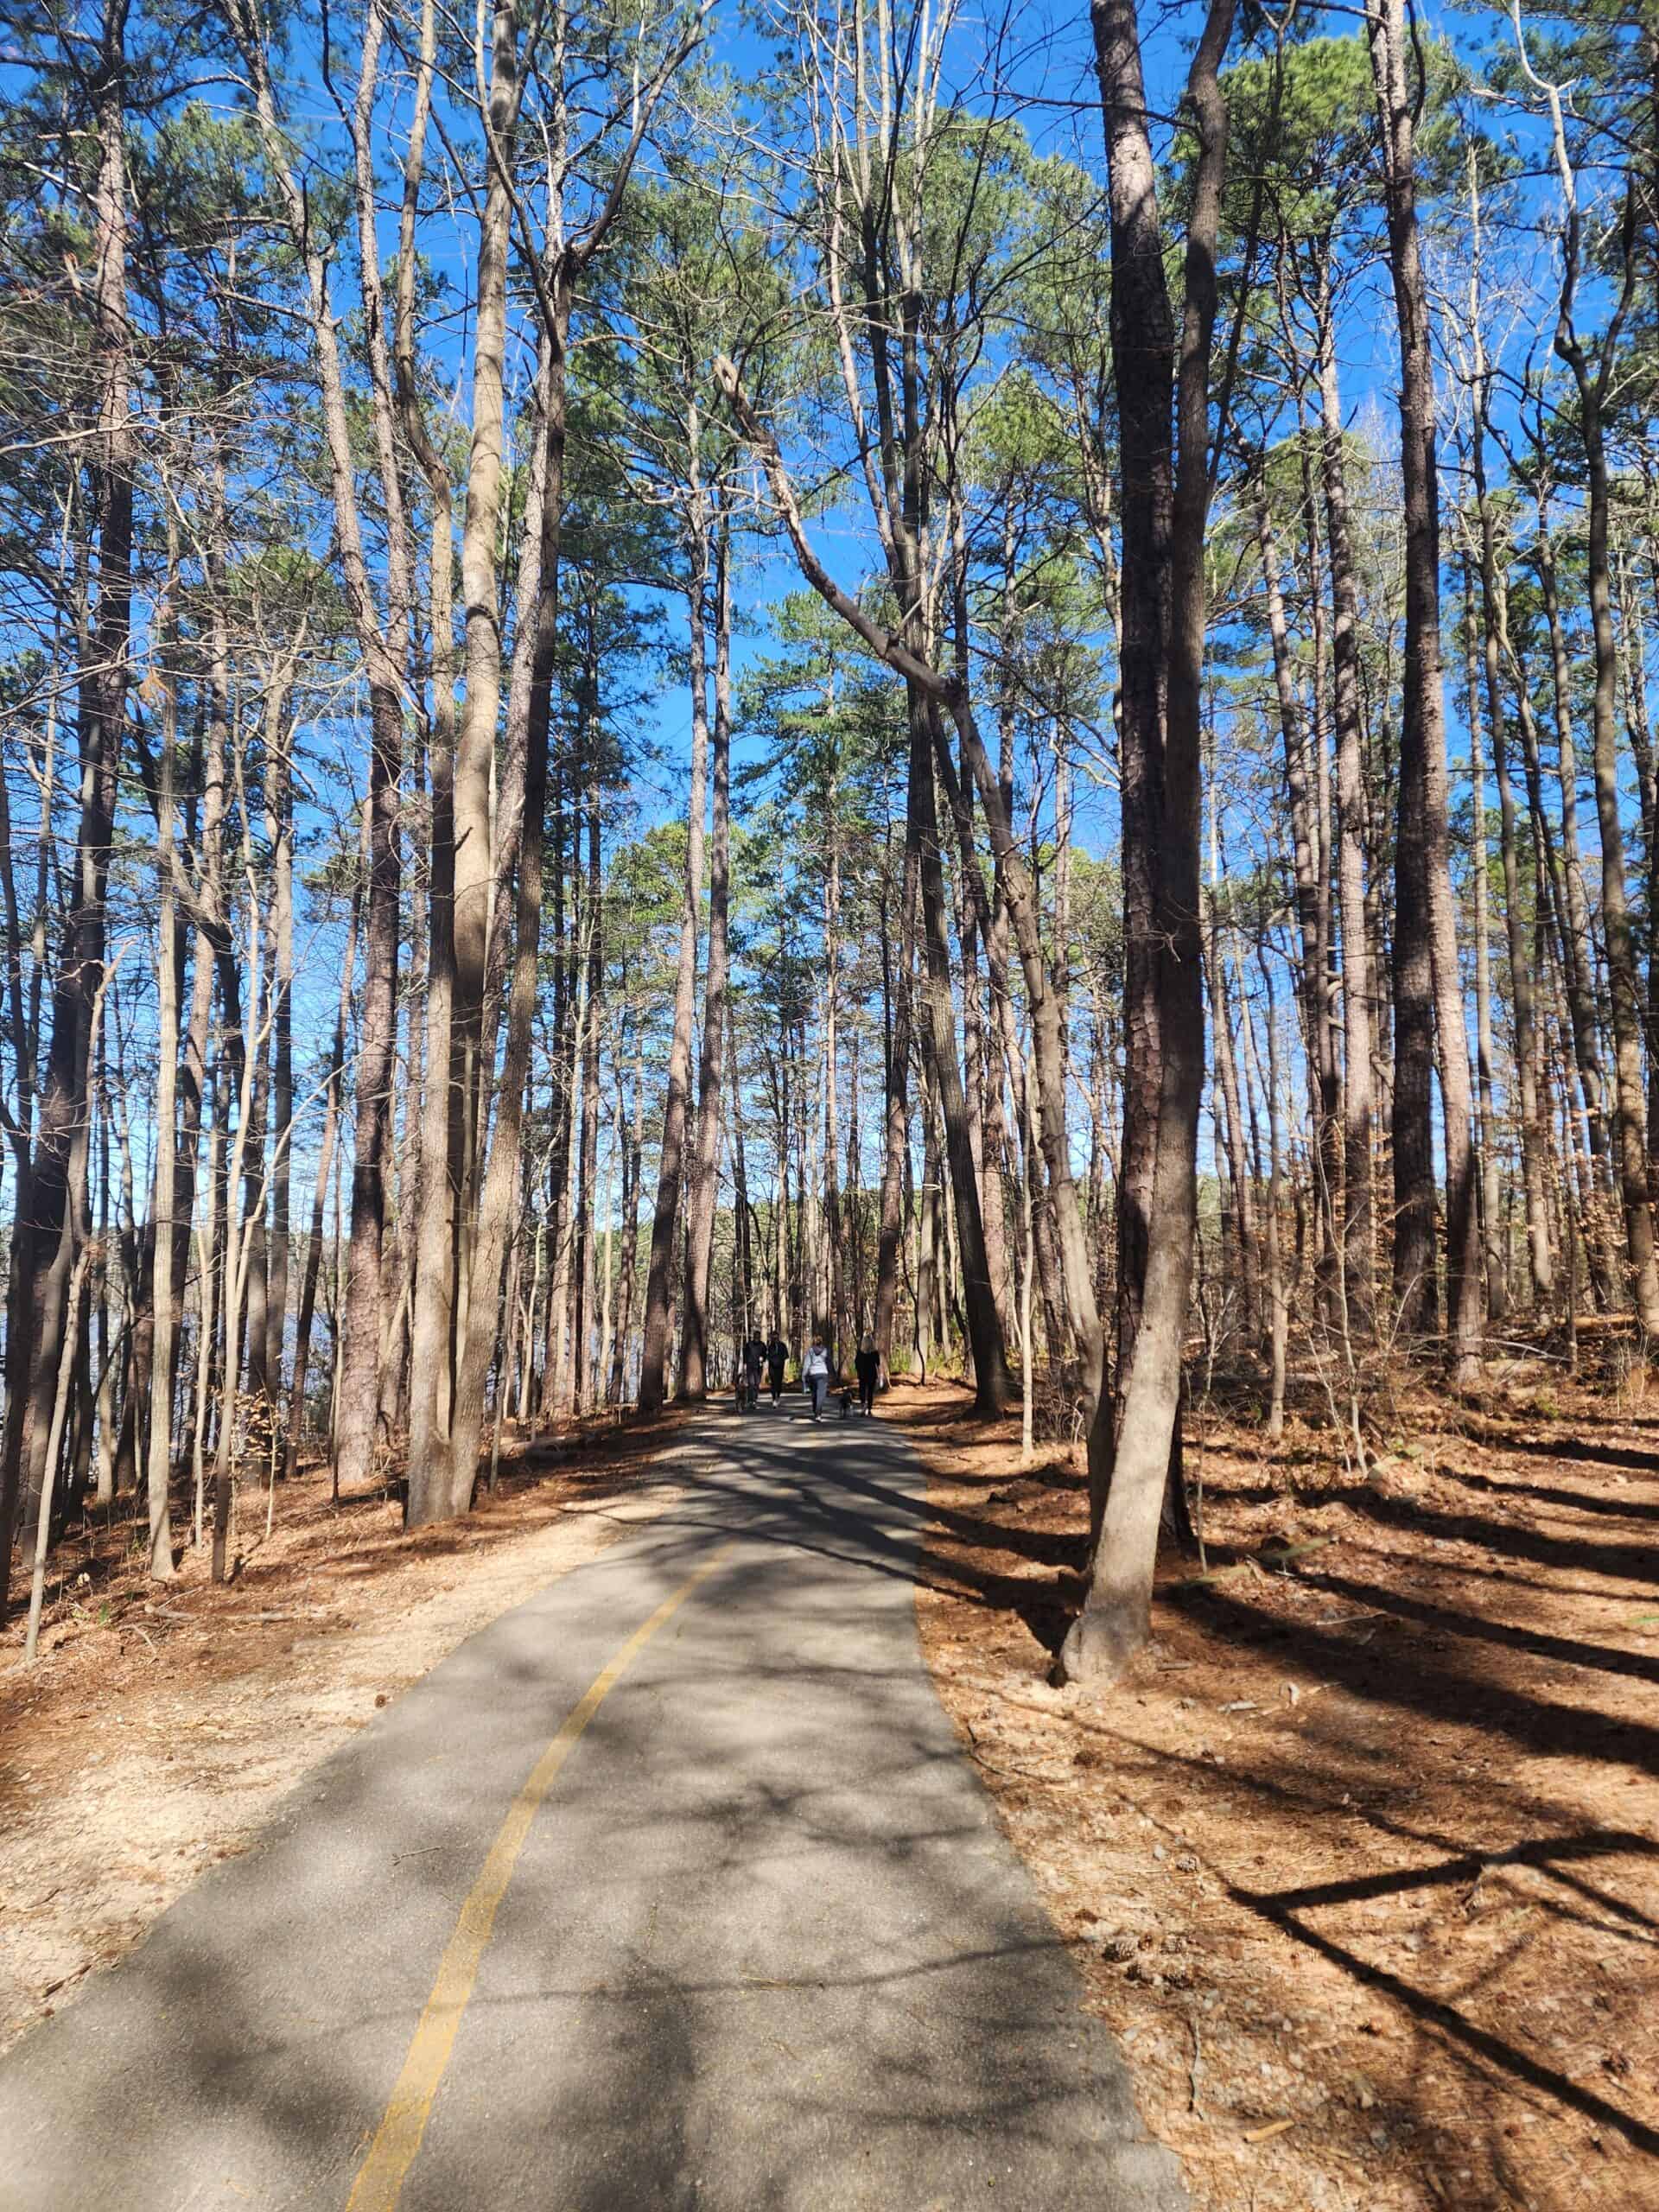 A peaceful trail winds through a tall pine forest, with shadows stretching across the path and people in the distance enjoying a sunny day outdoors, ideal for hiking and nature walks.